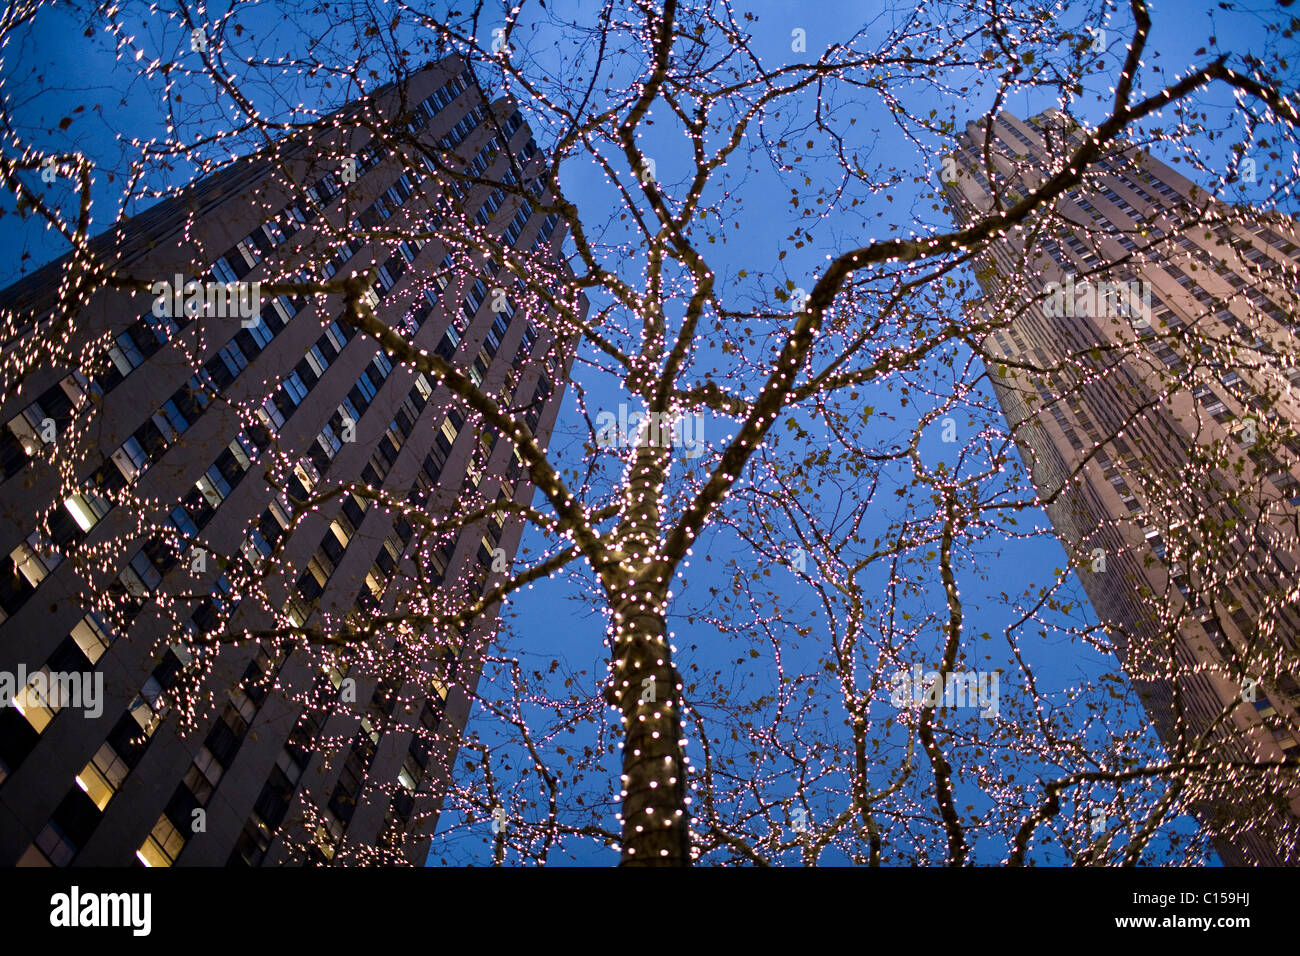 The Rockefeller Centre at night with the Chrismas lights on tree Stock Photo